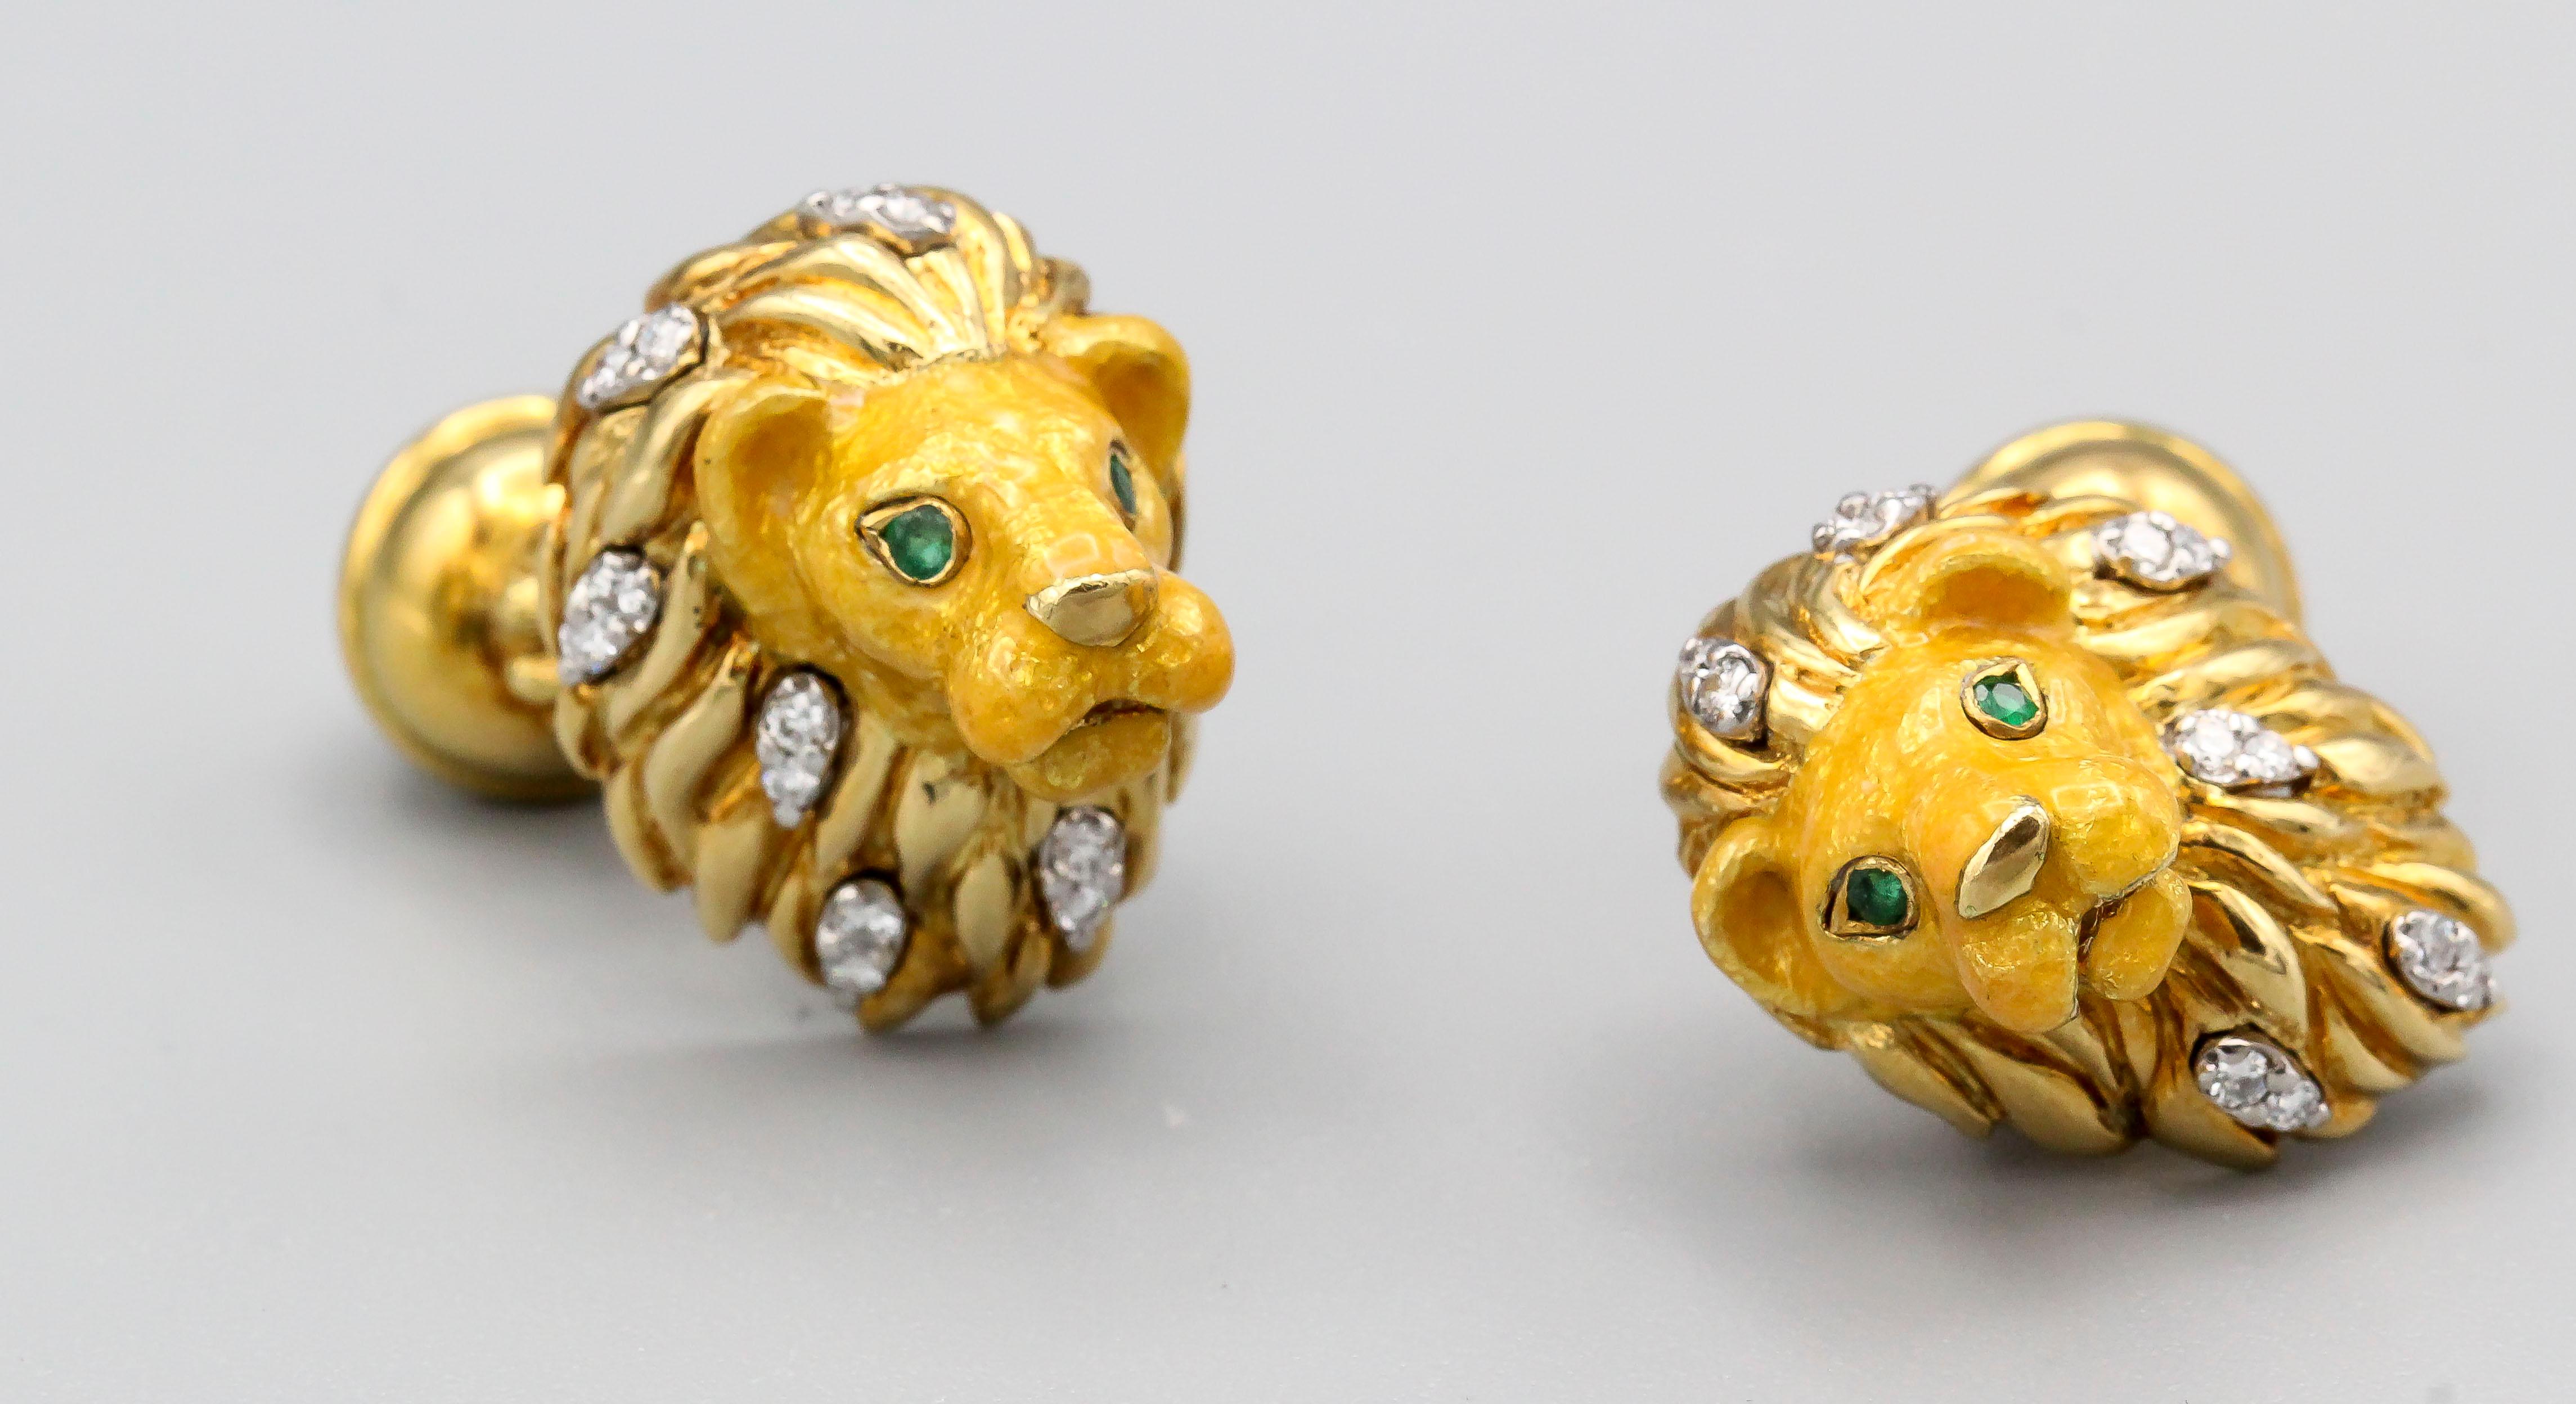 Handsome 18K yellow gold cufflinks by Tiffany & Co. They resemble a lion heads with round cut emerald eyes, diamonds in the mane, enameled face, and the opposite end with a paw on top of a sphere coming out of the back. 

Hallmarks: Tiffany & Co.